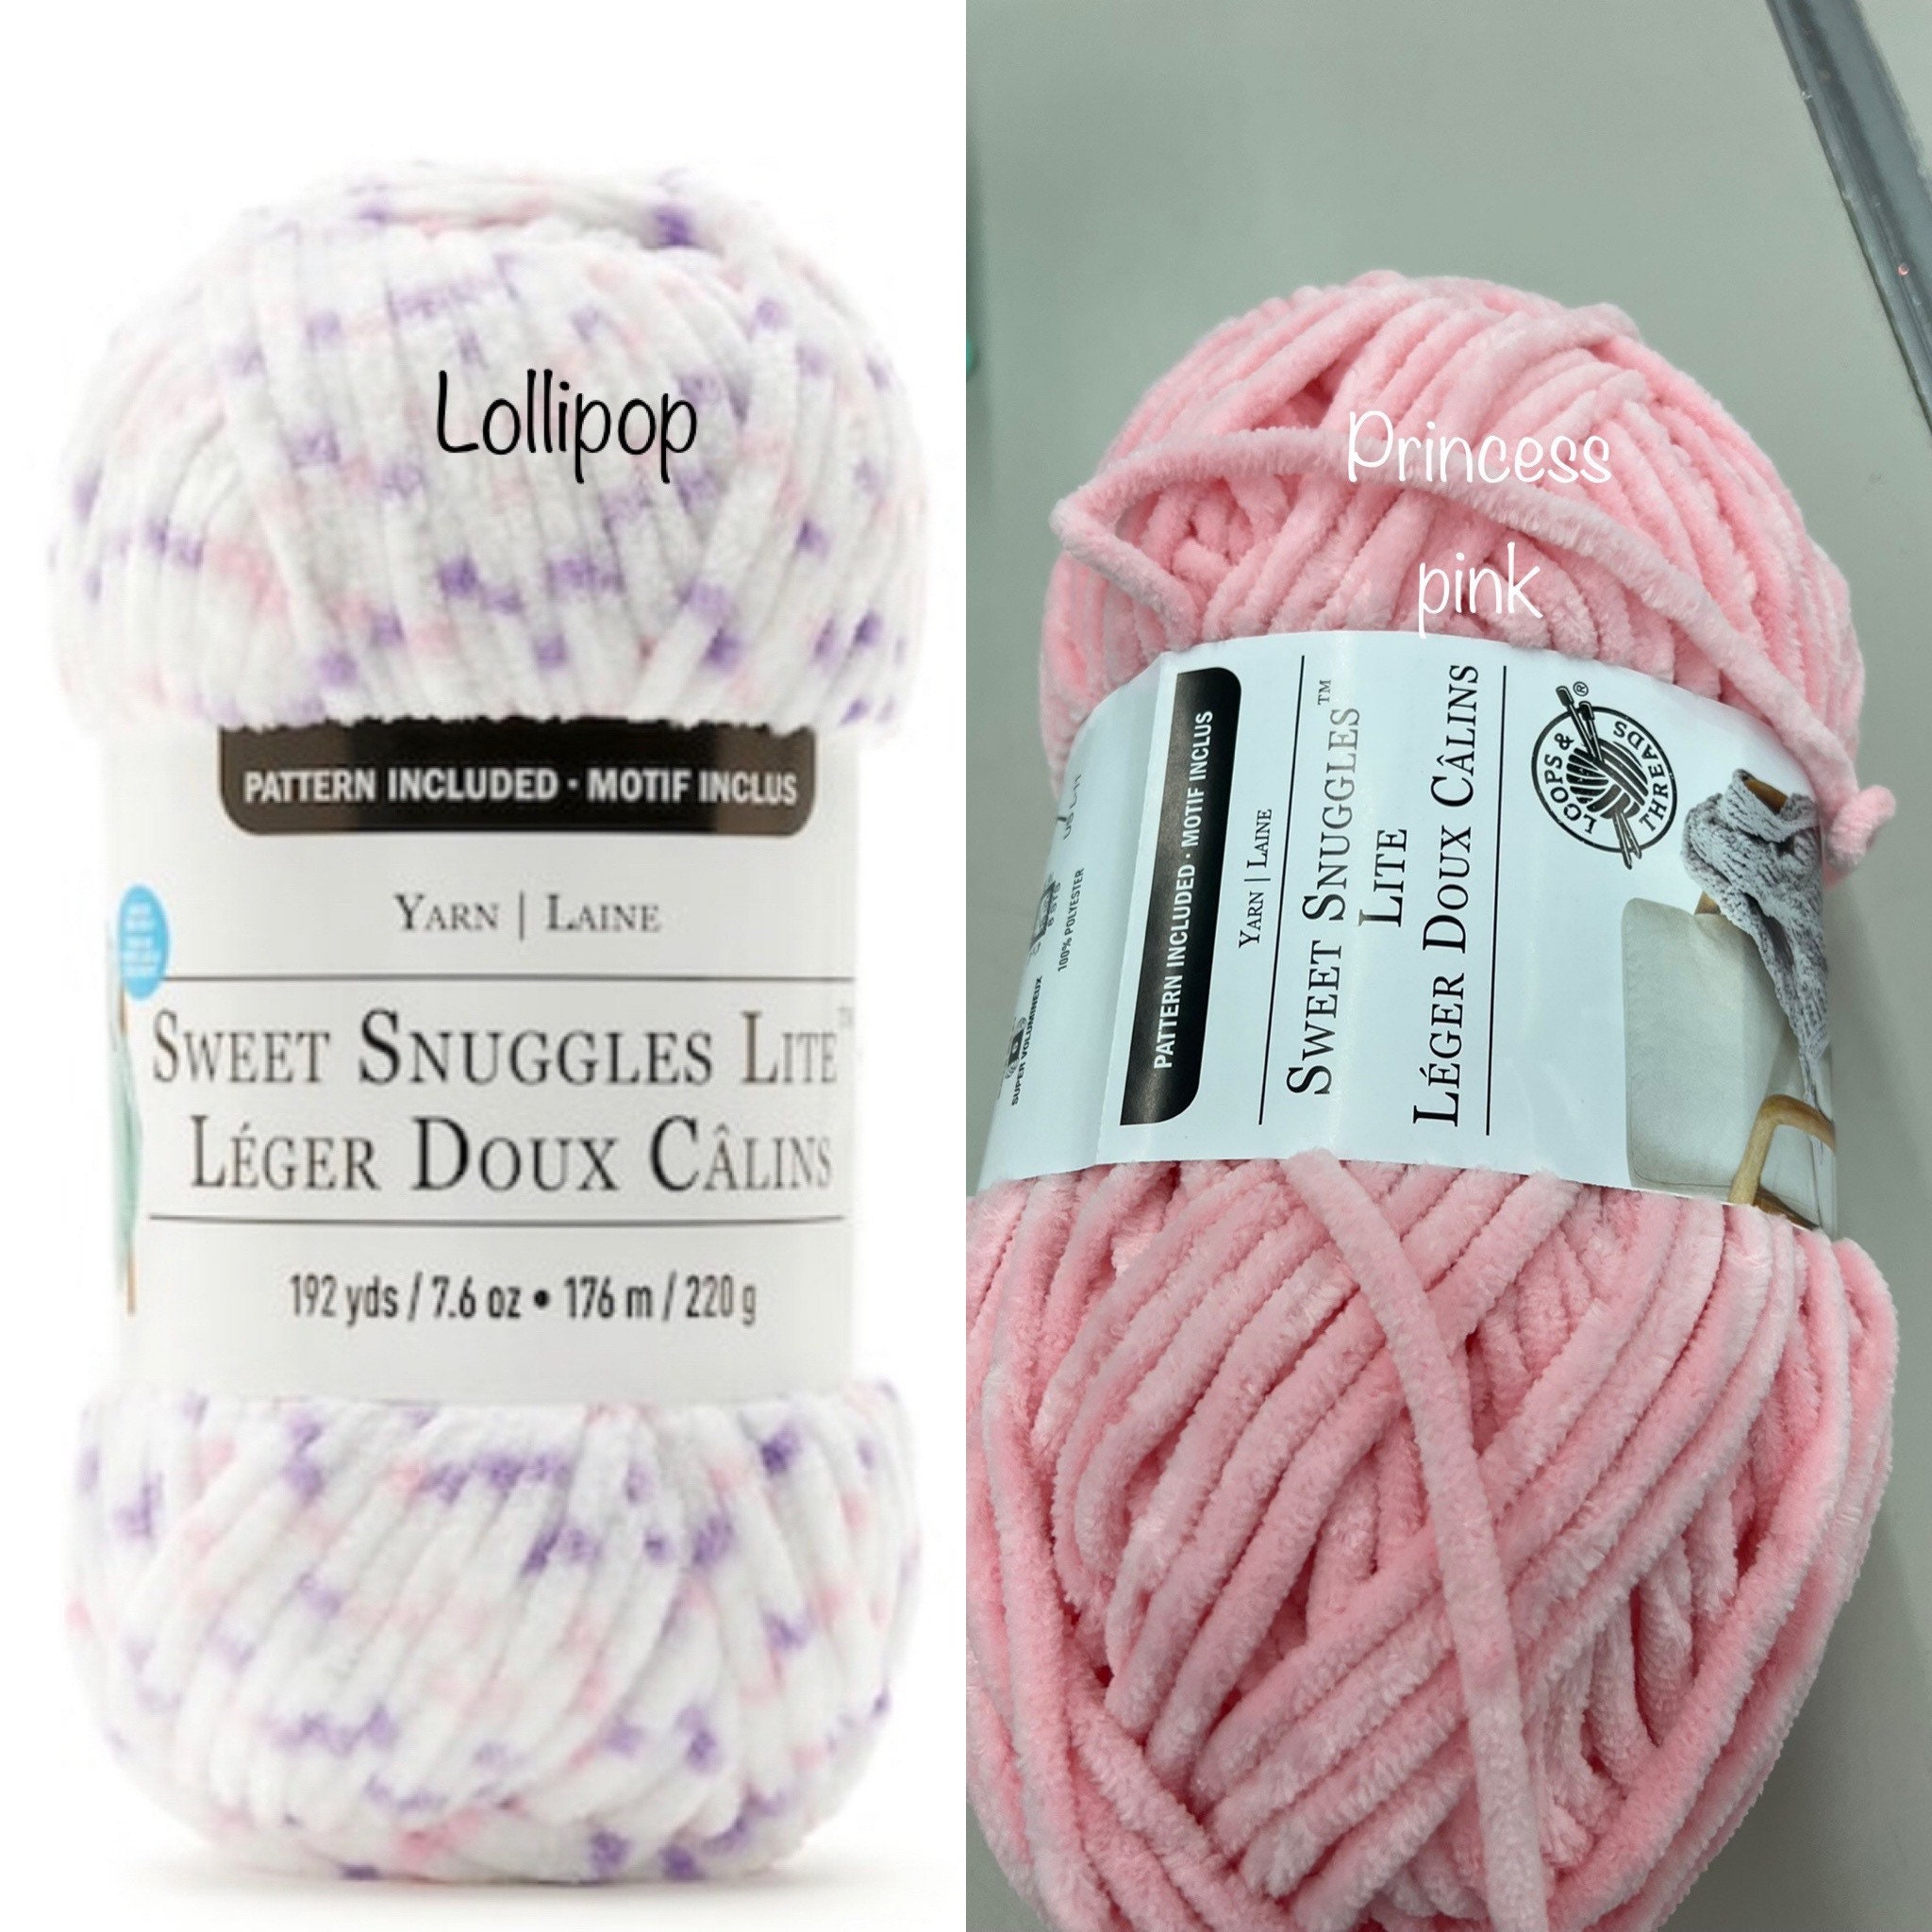 12 Pack: Sweet Snuggles Lite Blossom™ Yarn by Loops & Threads